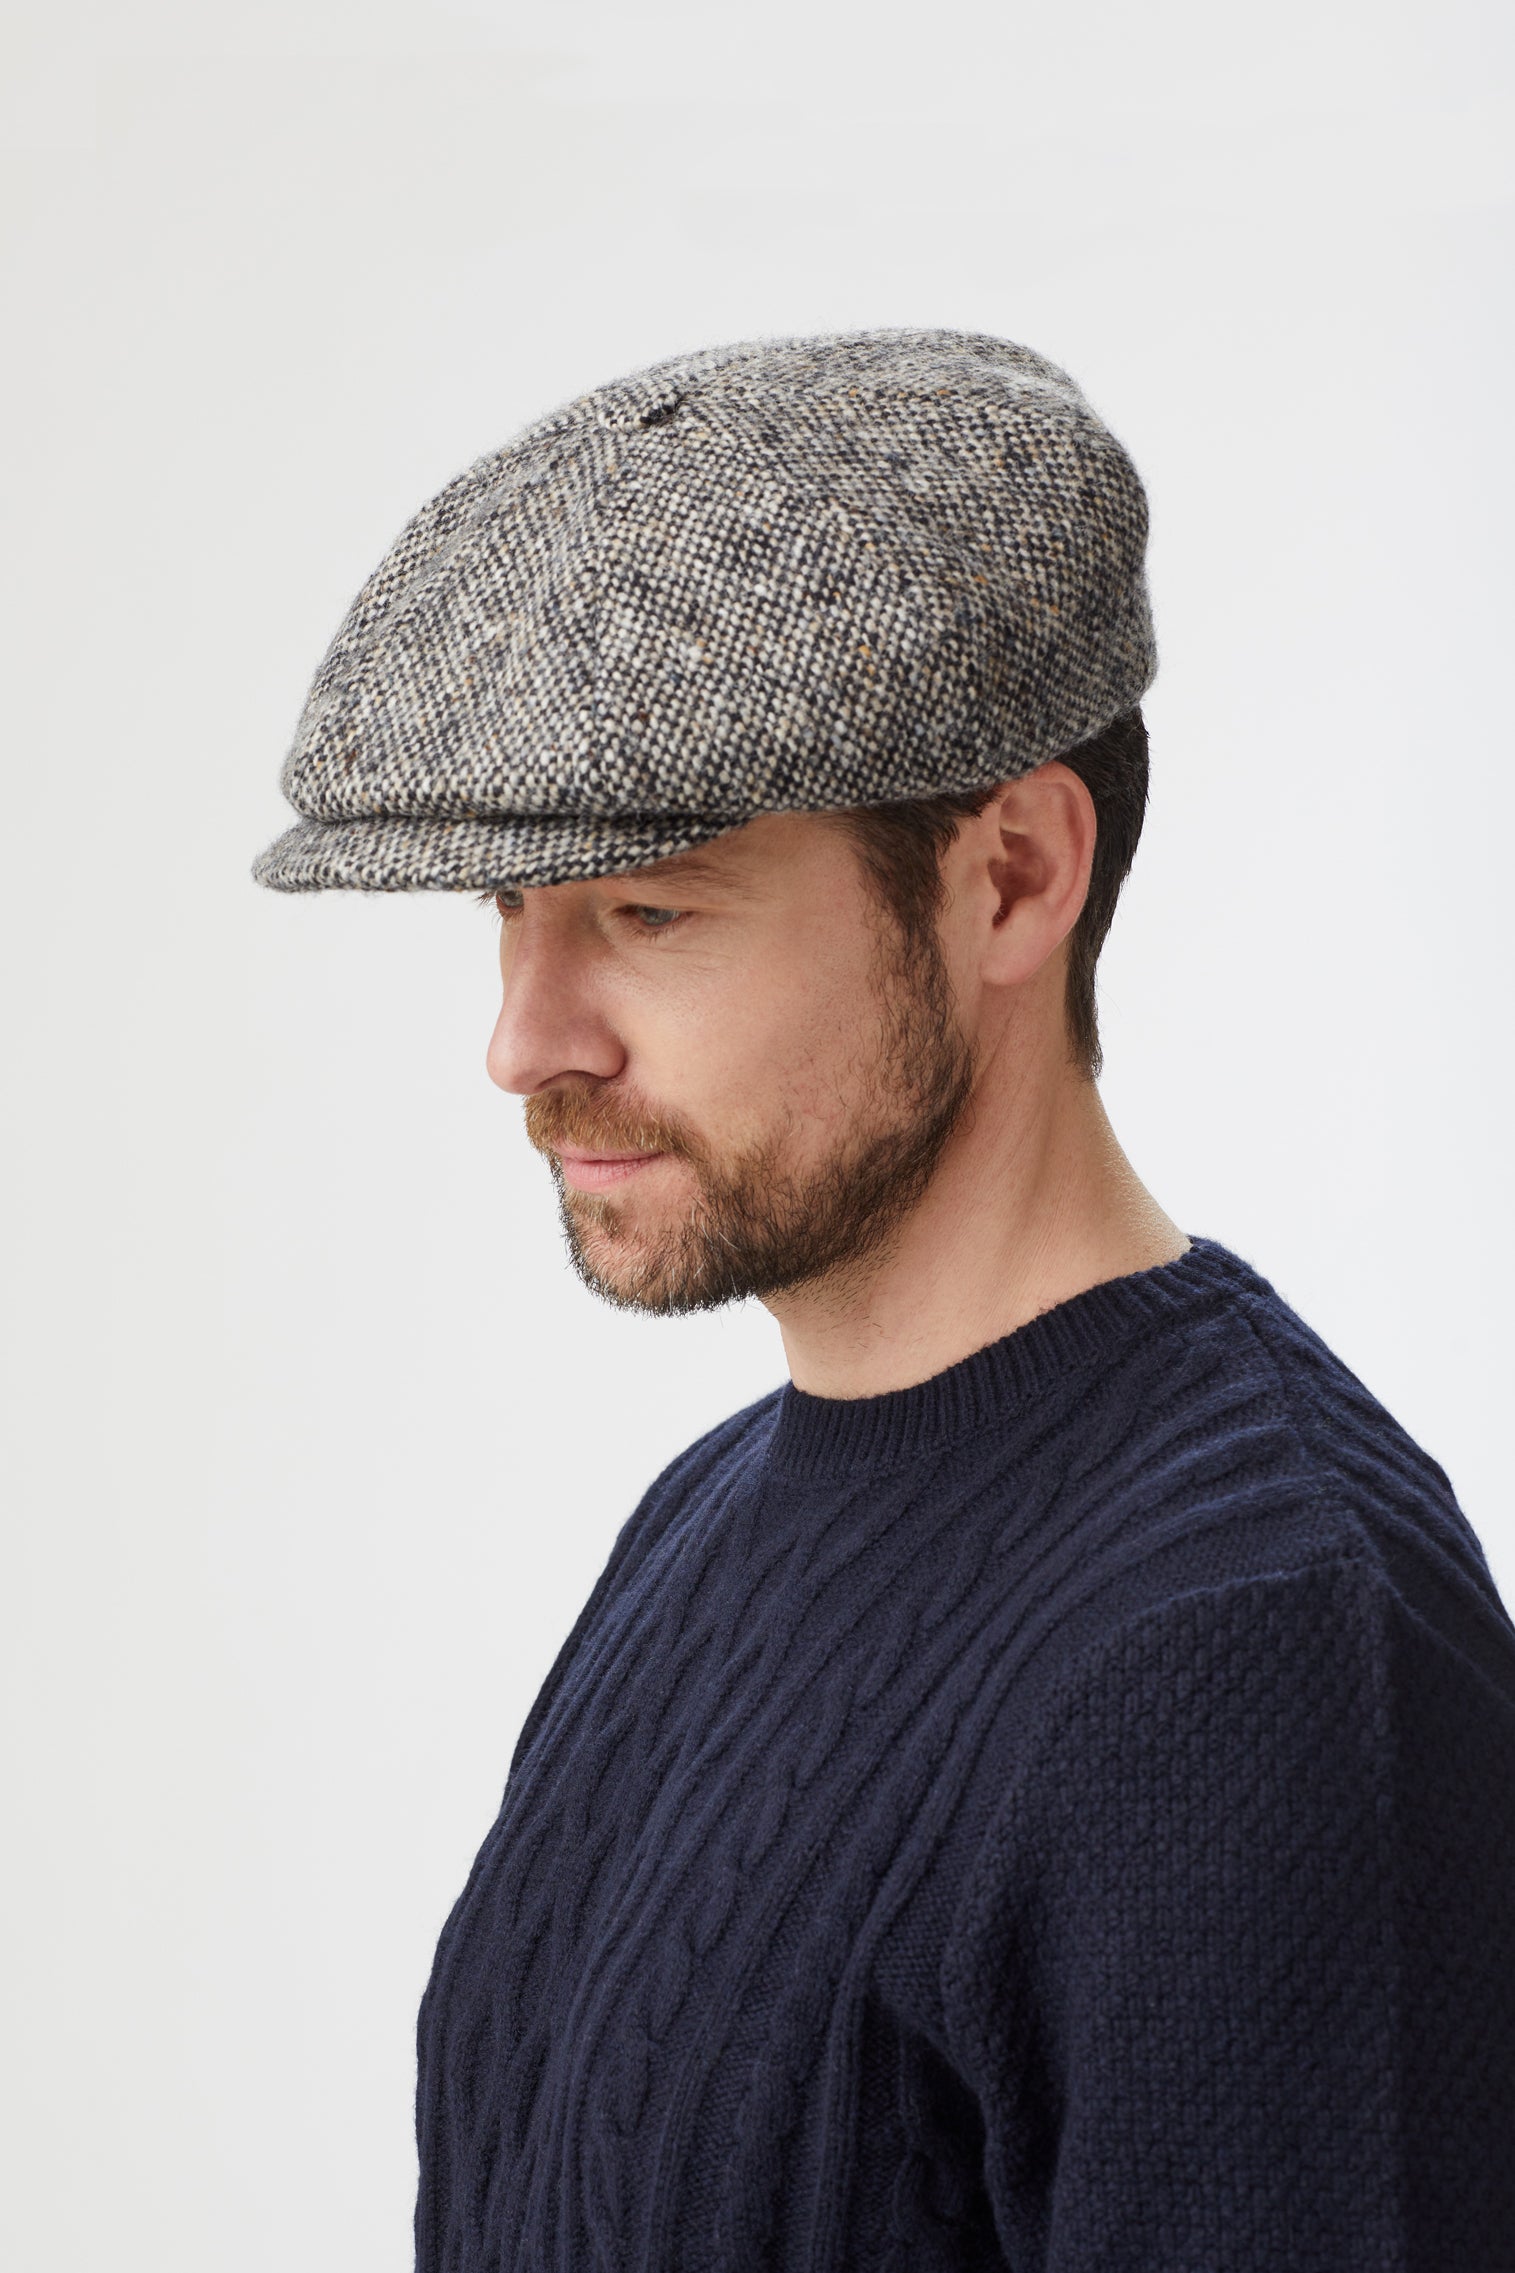 Muirfield Tweed Bakerboy Cap - Hats for Oval Face Shapes - Lock & Co. Hatters London UK